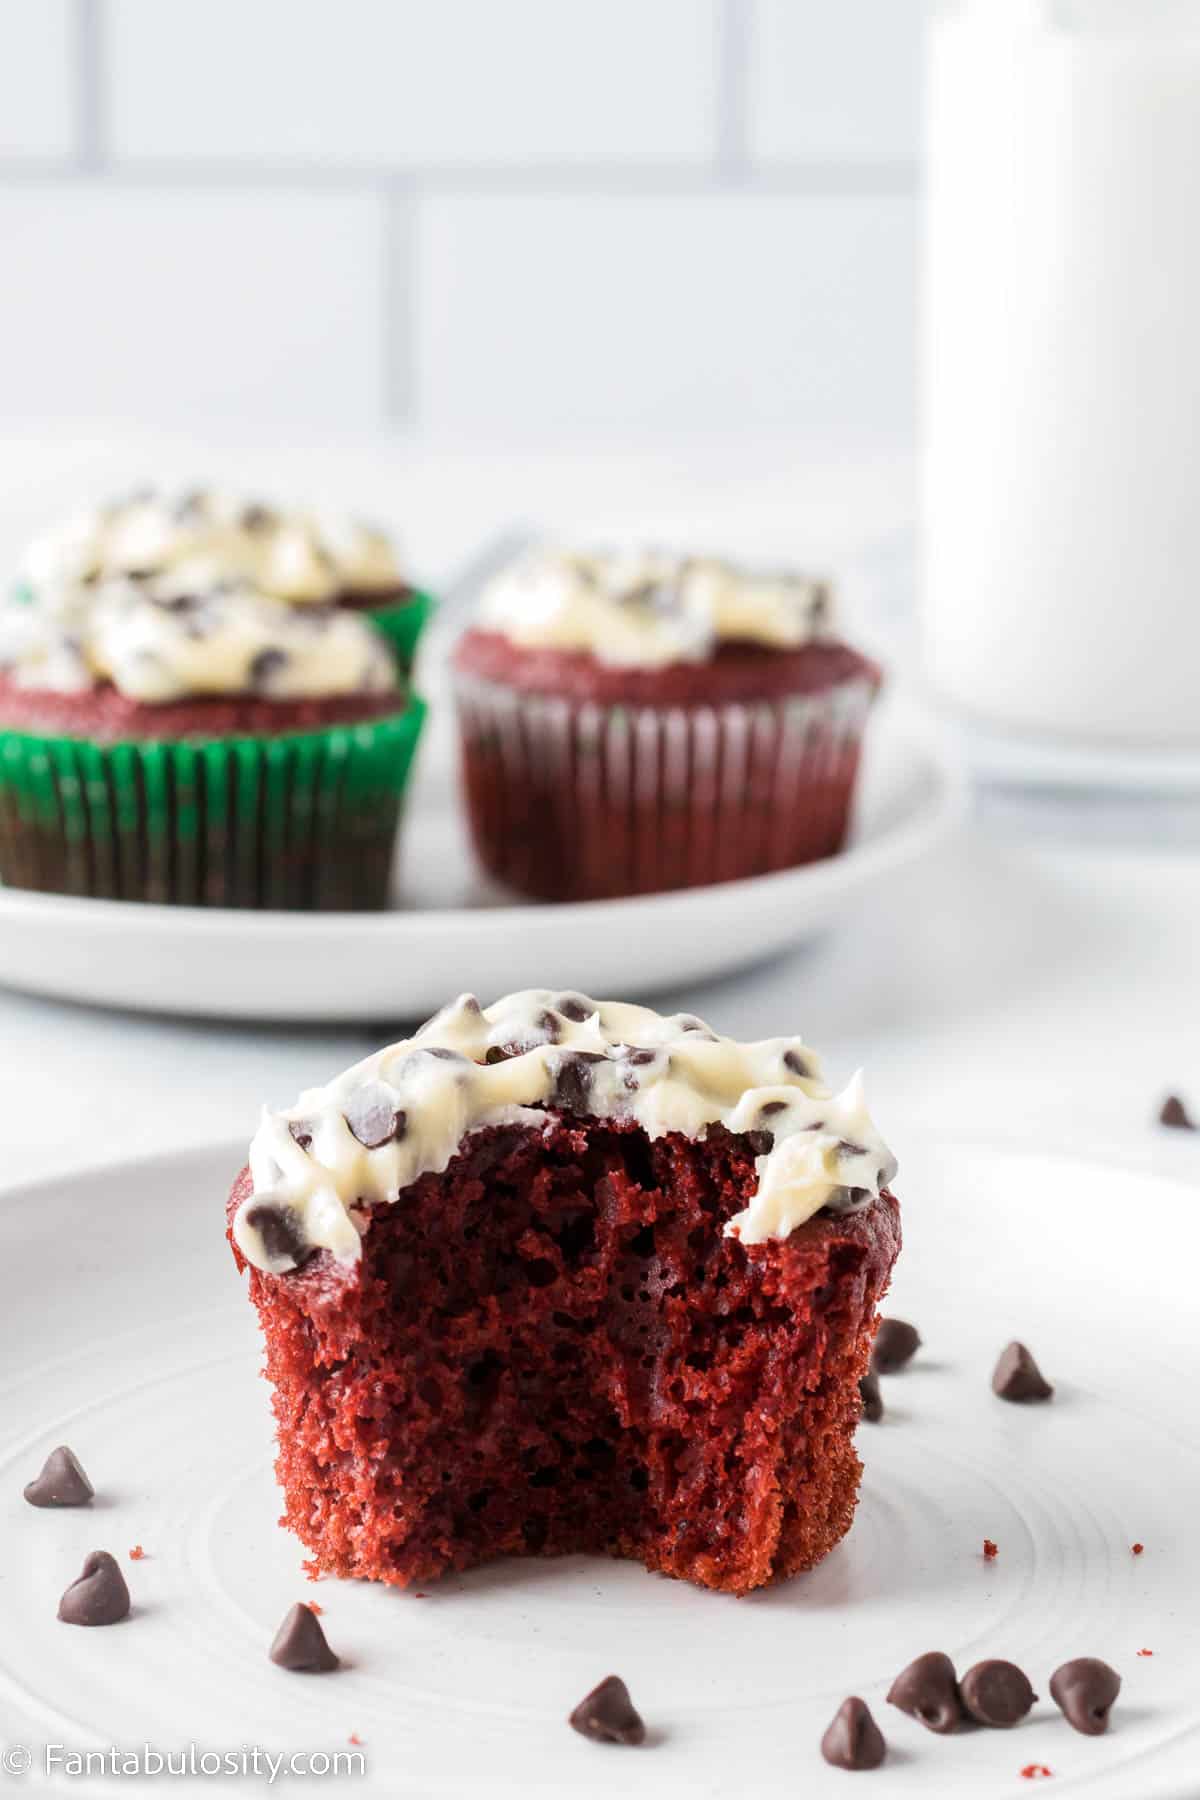 Red velvet cupcake with chocolate chip frosting, with a bite taken out of it, sitting on a white plate.